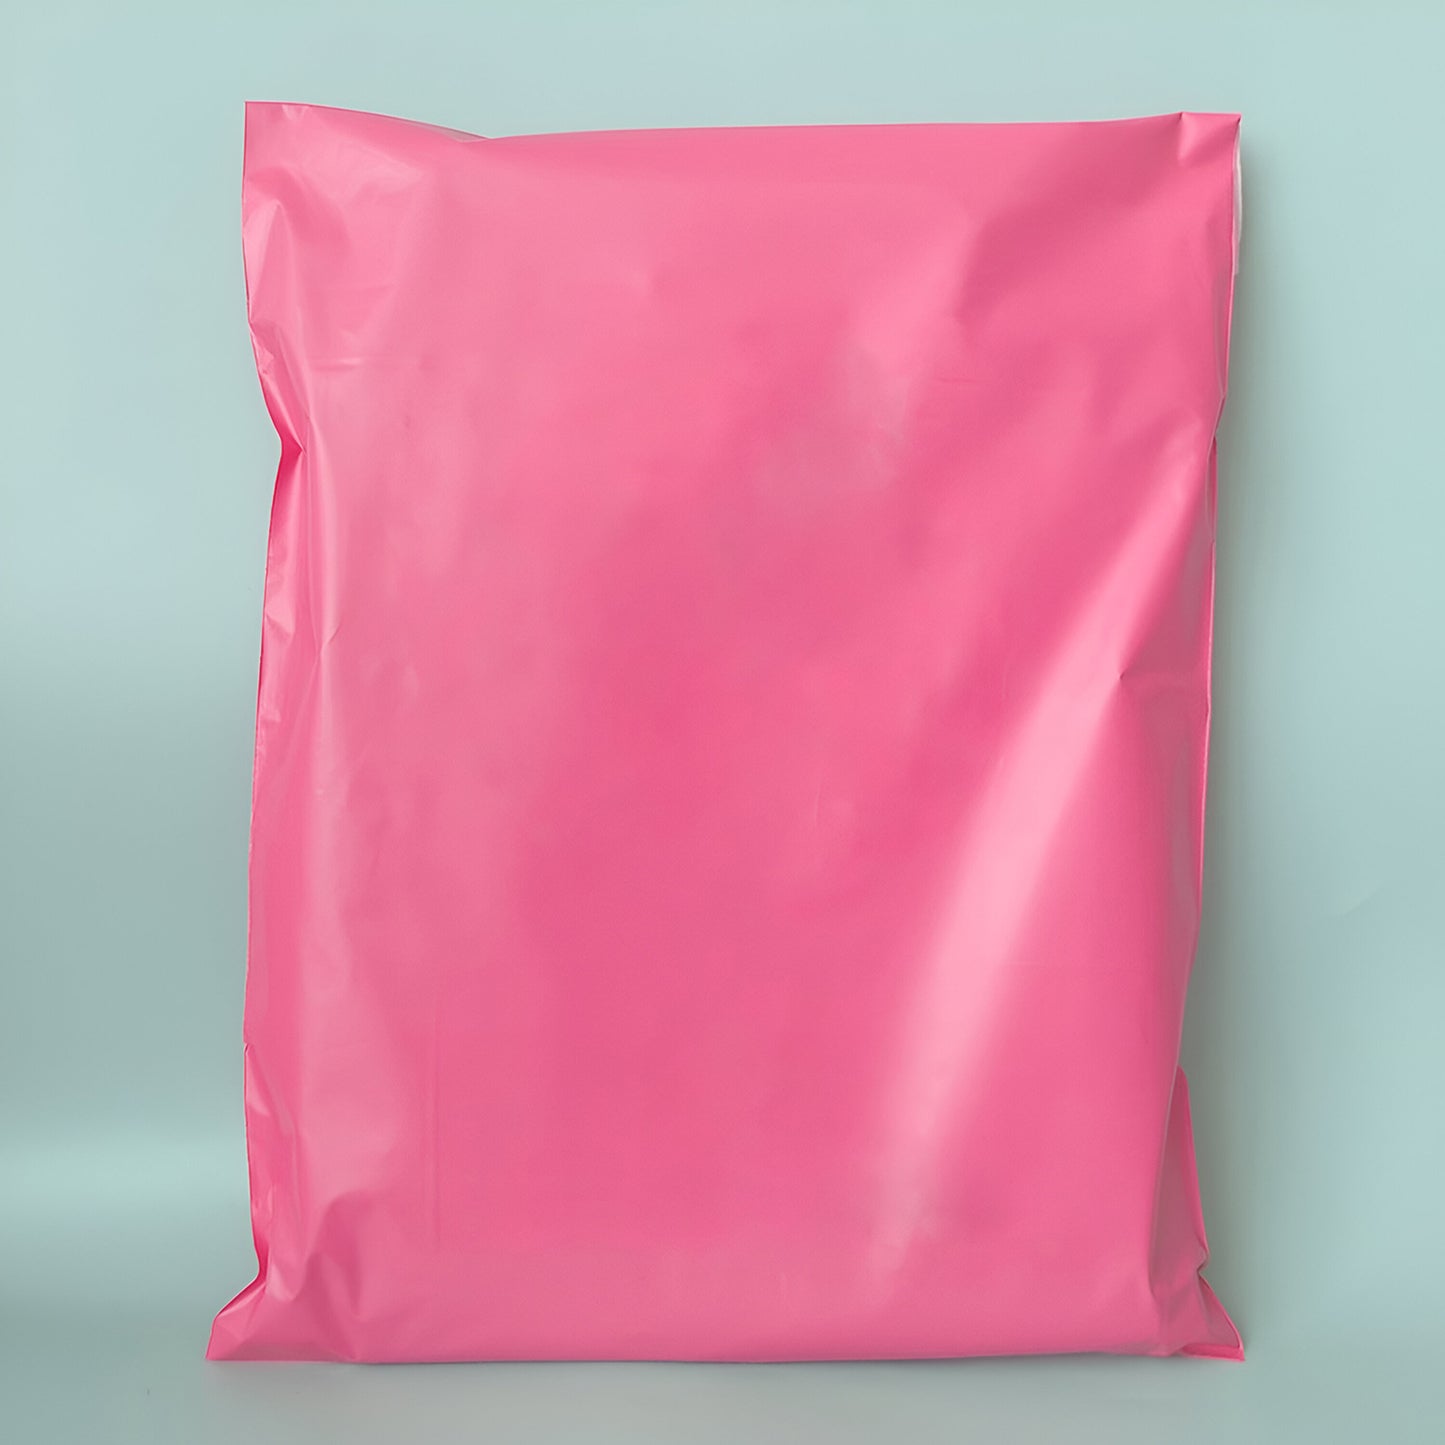   Mailing Bags pink